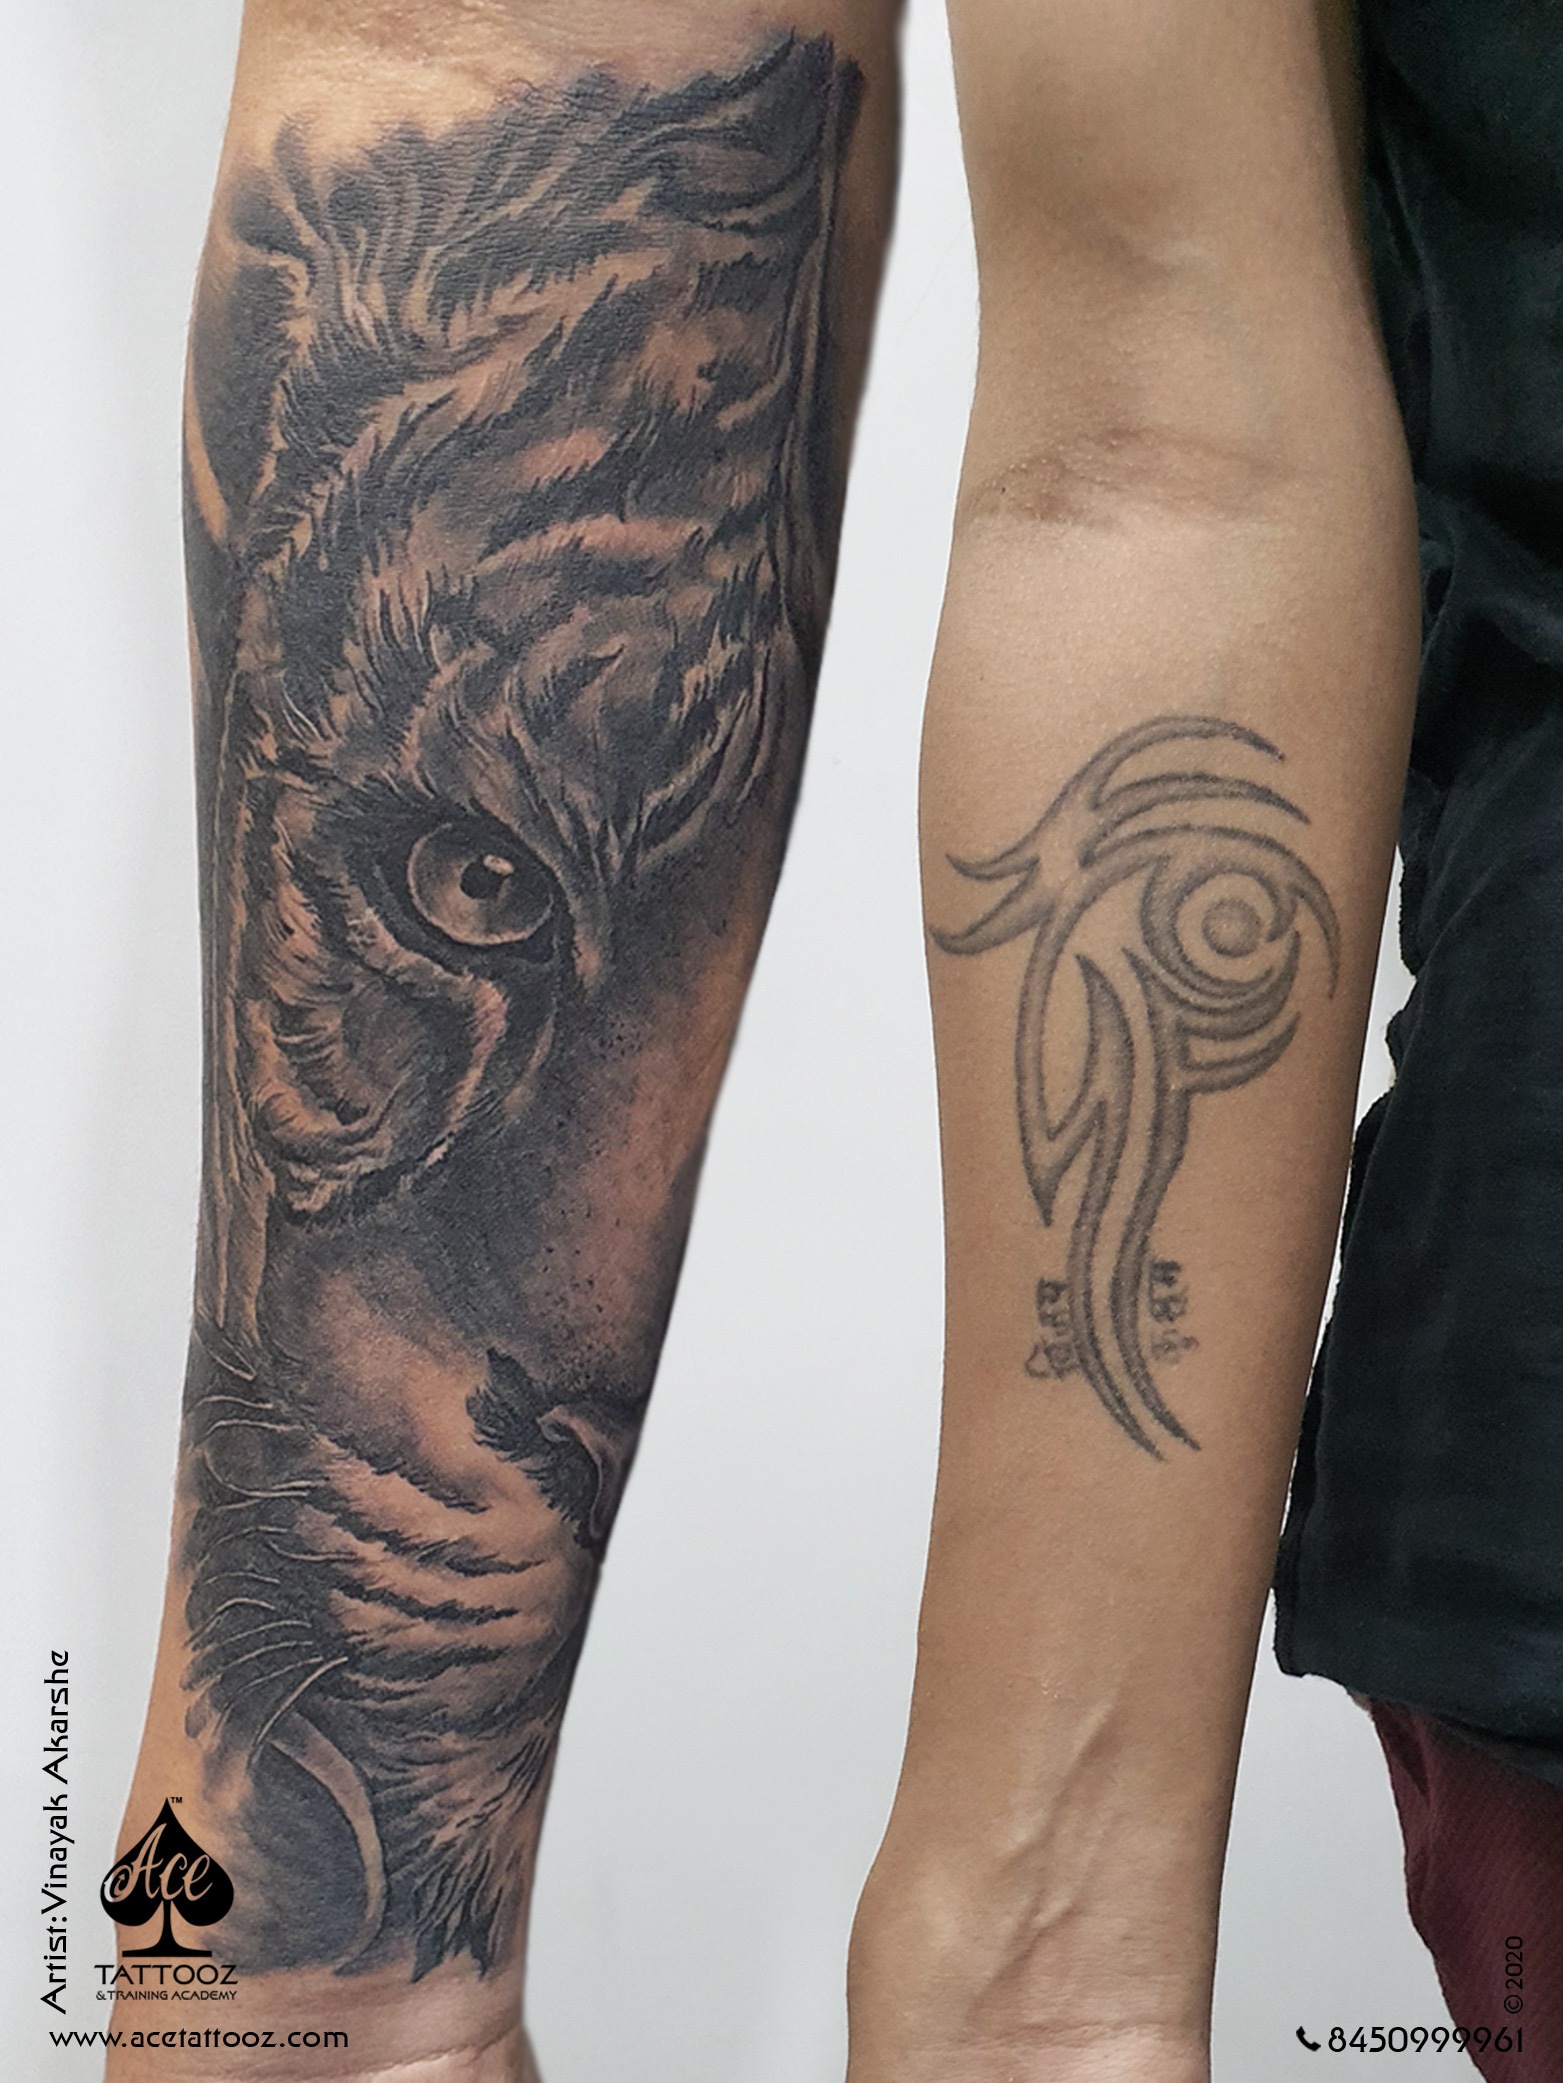 Colour from Valhalla Tattoo - tiger#tattoo#rose#blackandgrey#animal#ink#proud#realistic#art  | Facebook